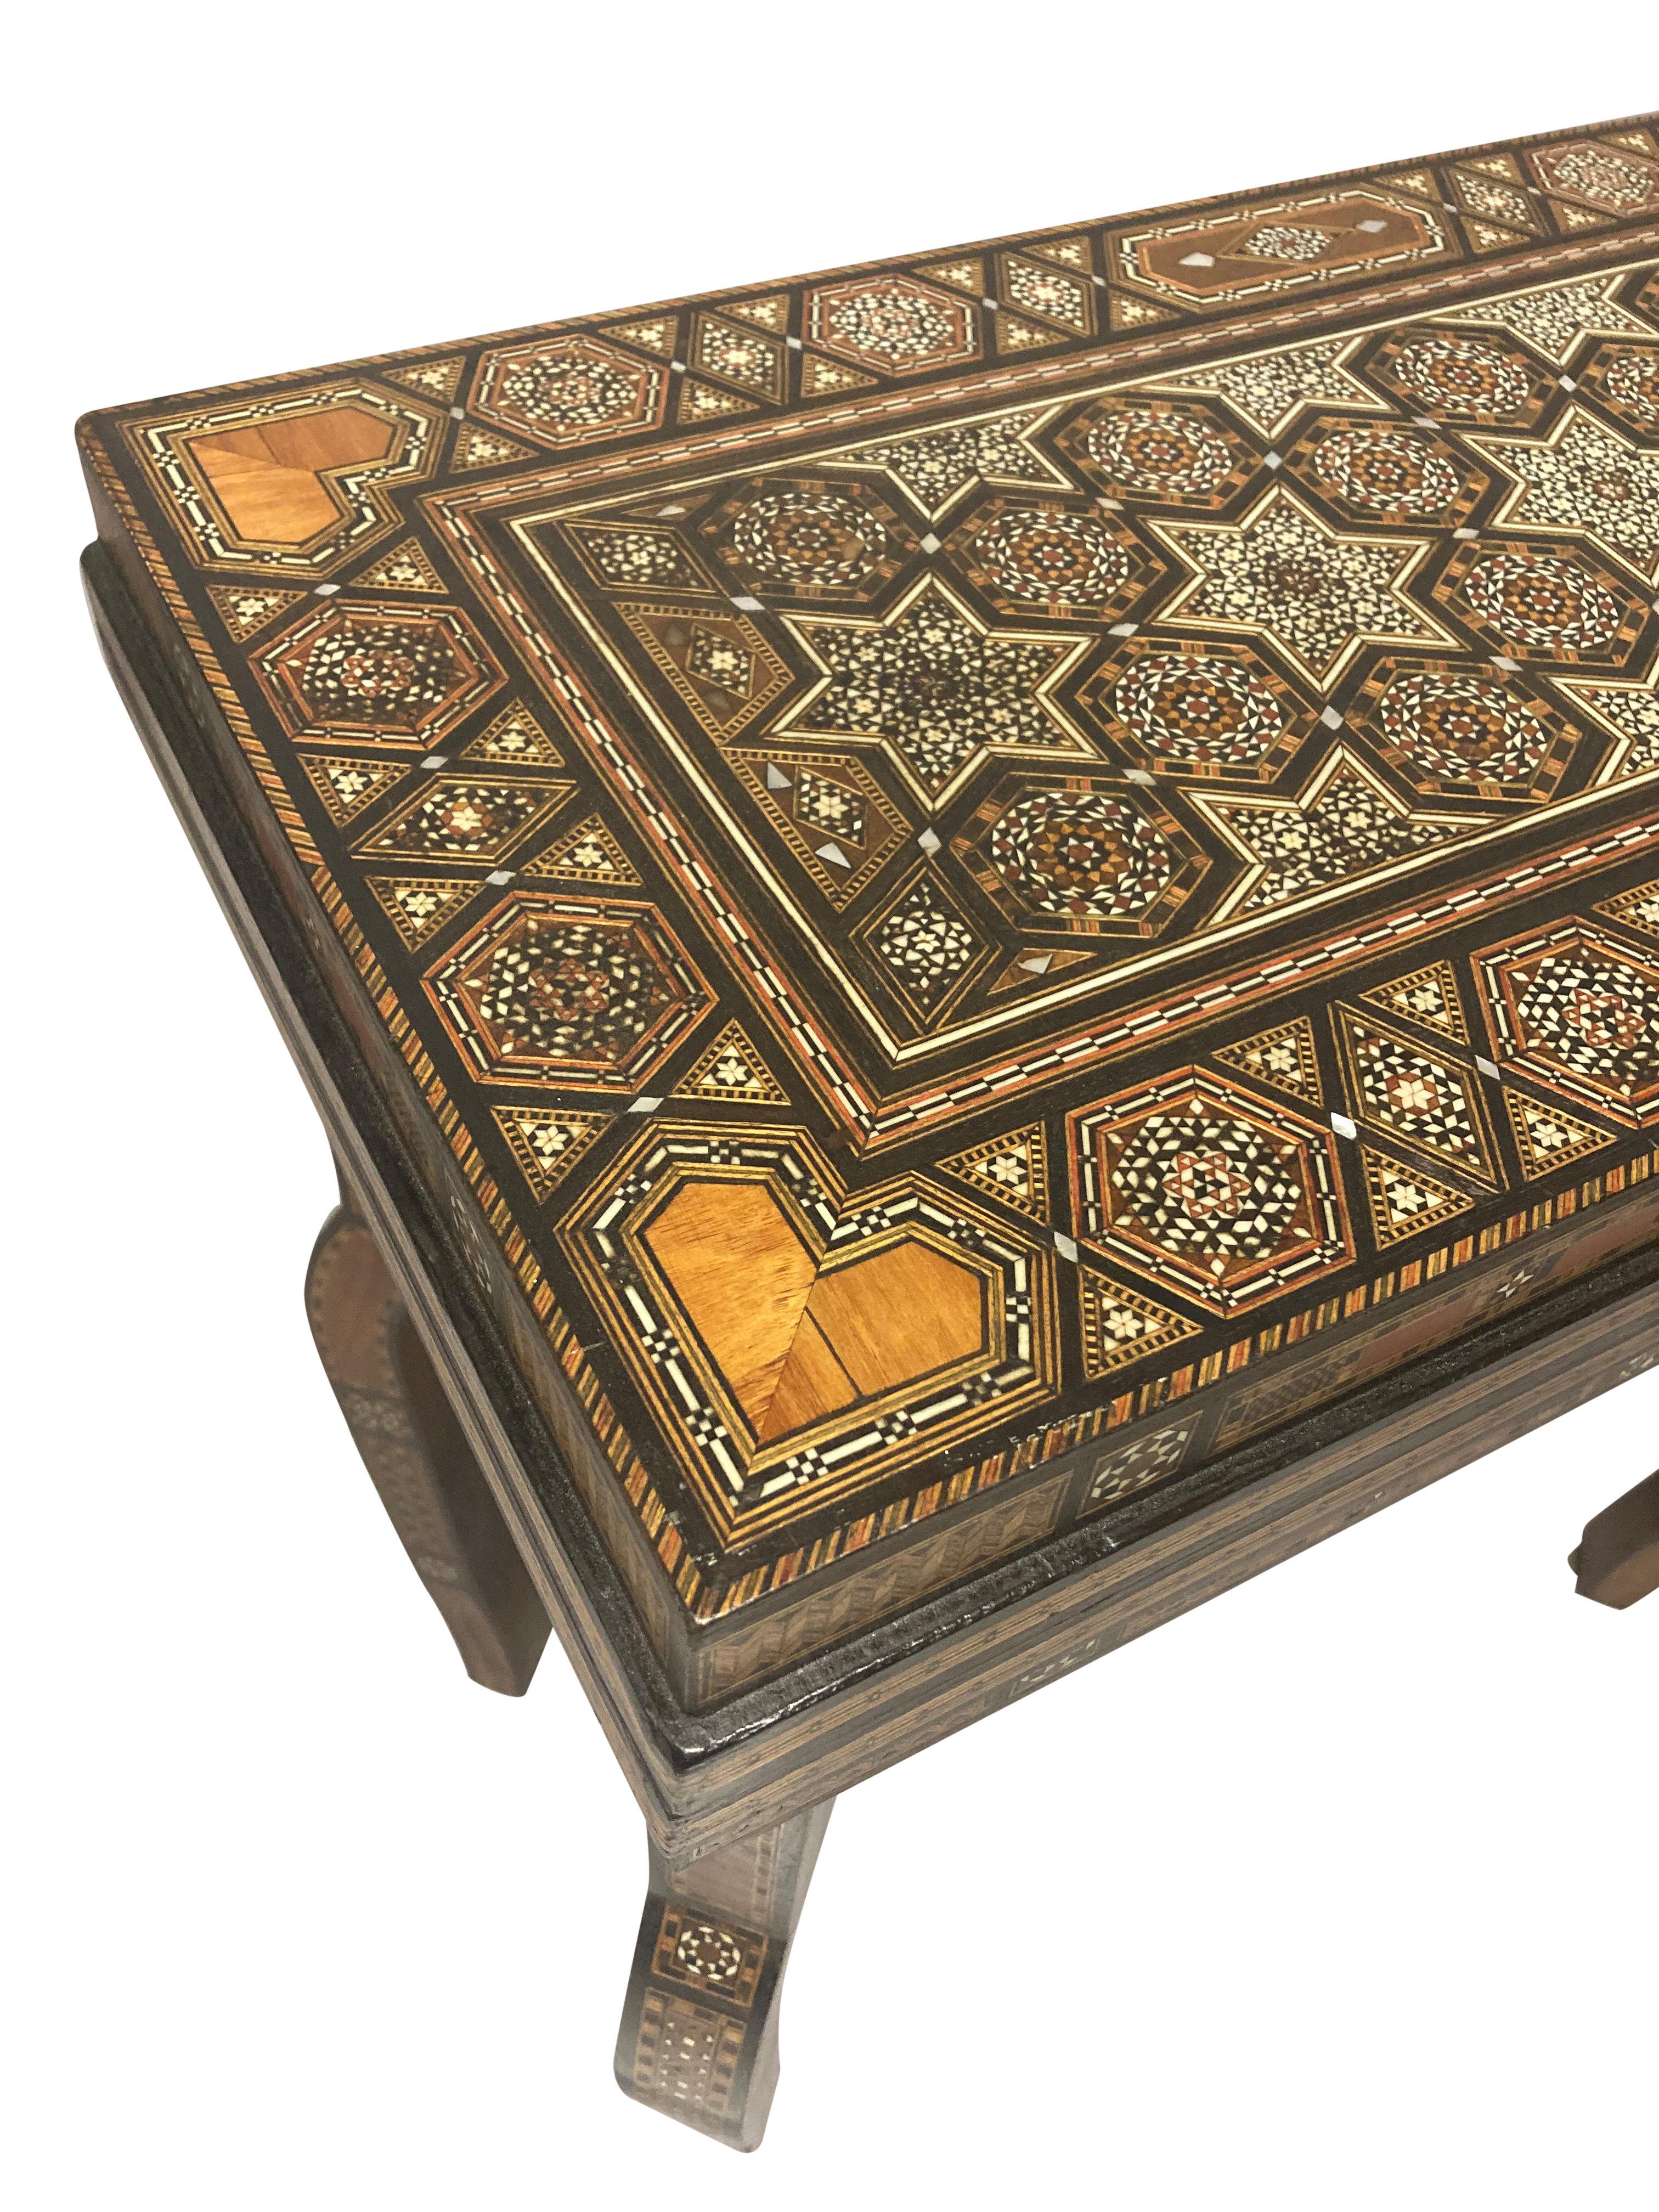 A Moorish games table of on cabriole legs, with a folding top, opening to reveal various games layouts, including a card table. Comprised mainly of olive wood, with hardwood and bone micro-mosaic inlay. Beautifully restored.